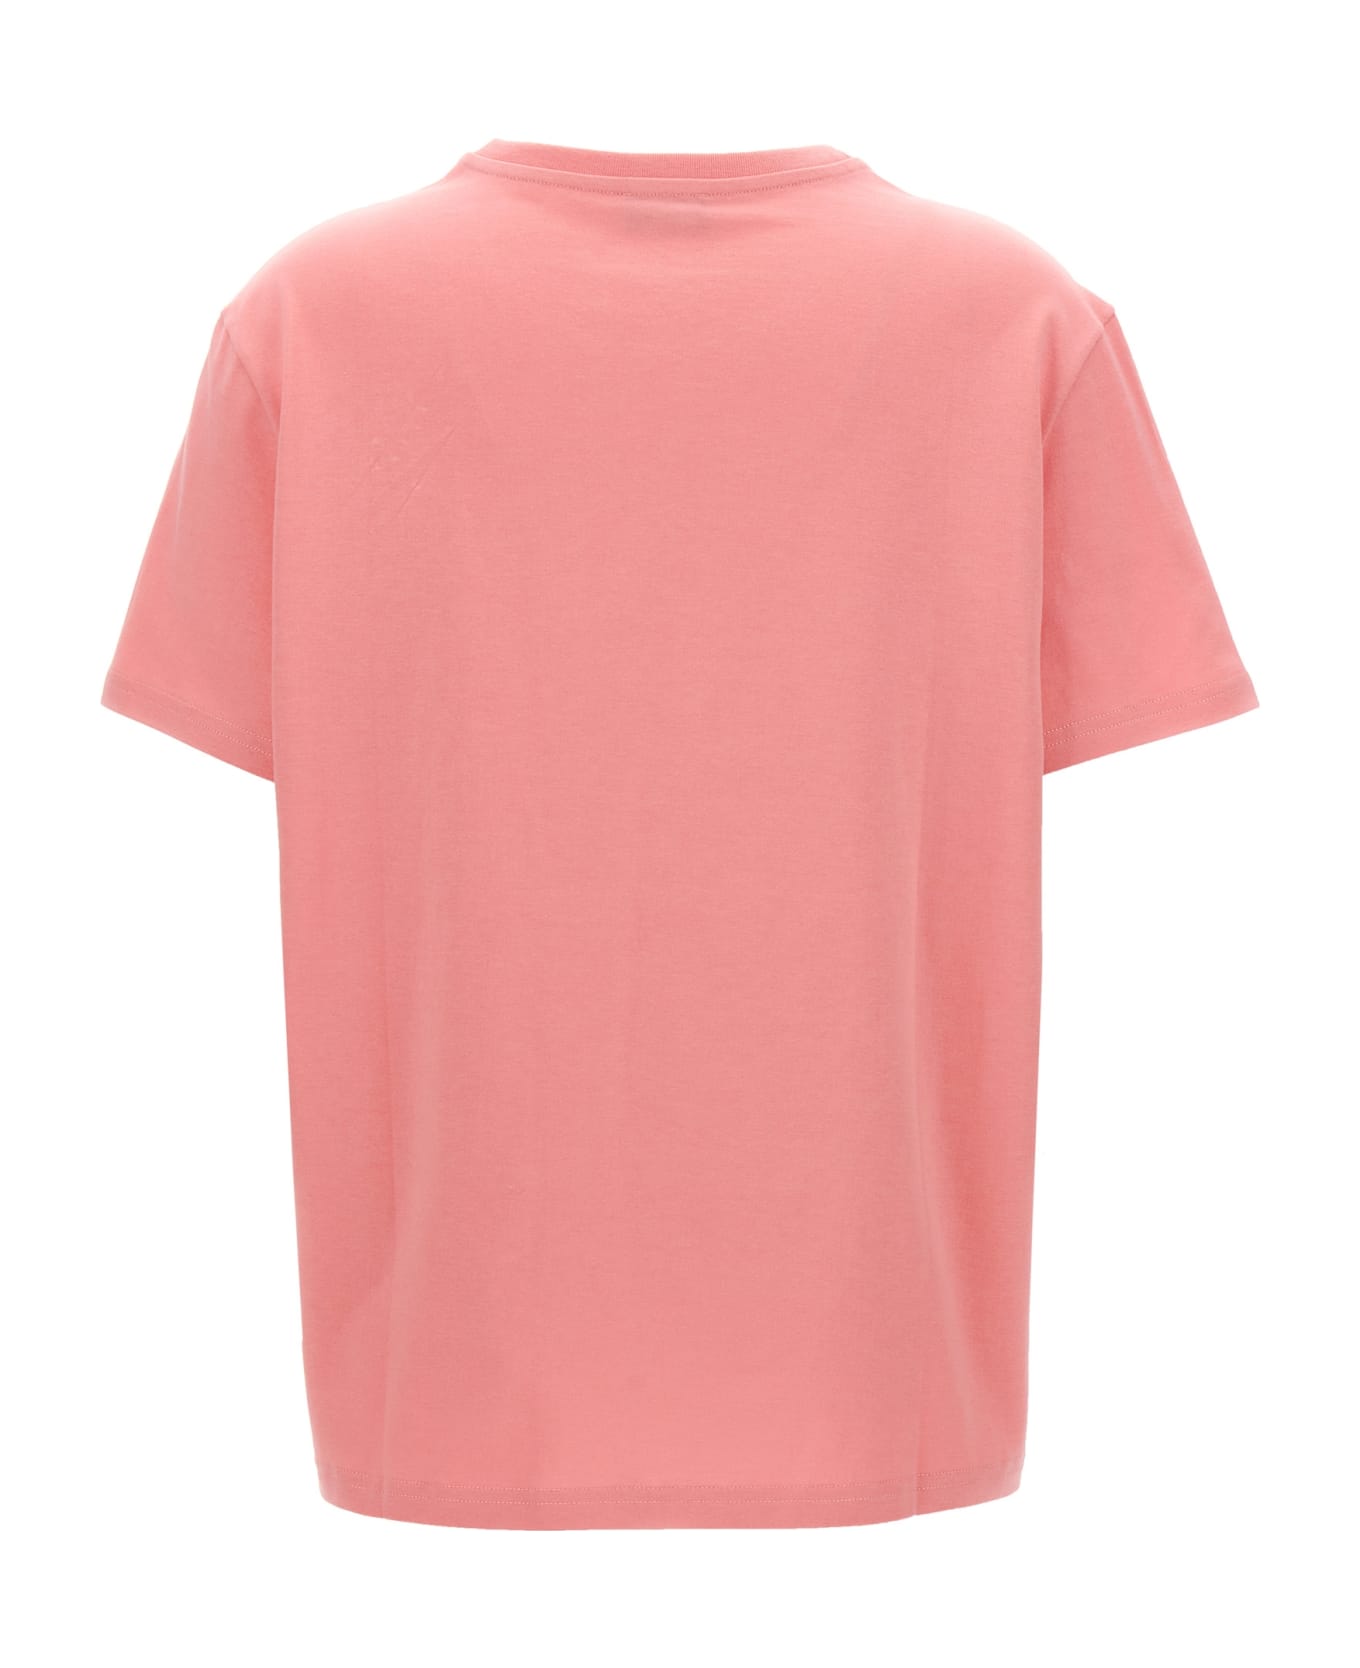 Etro Logo Embroidery T-shirt - Pink